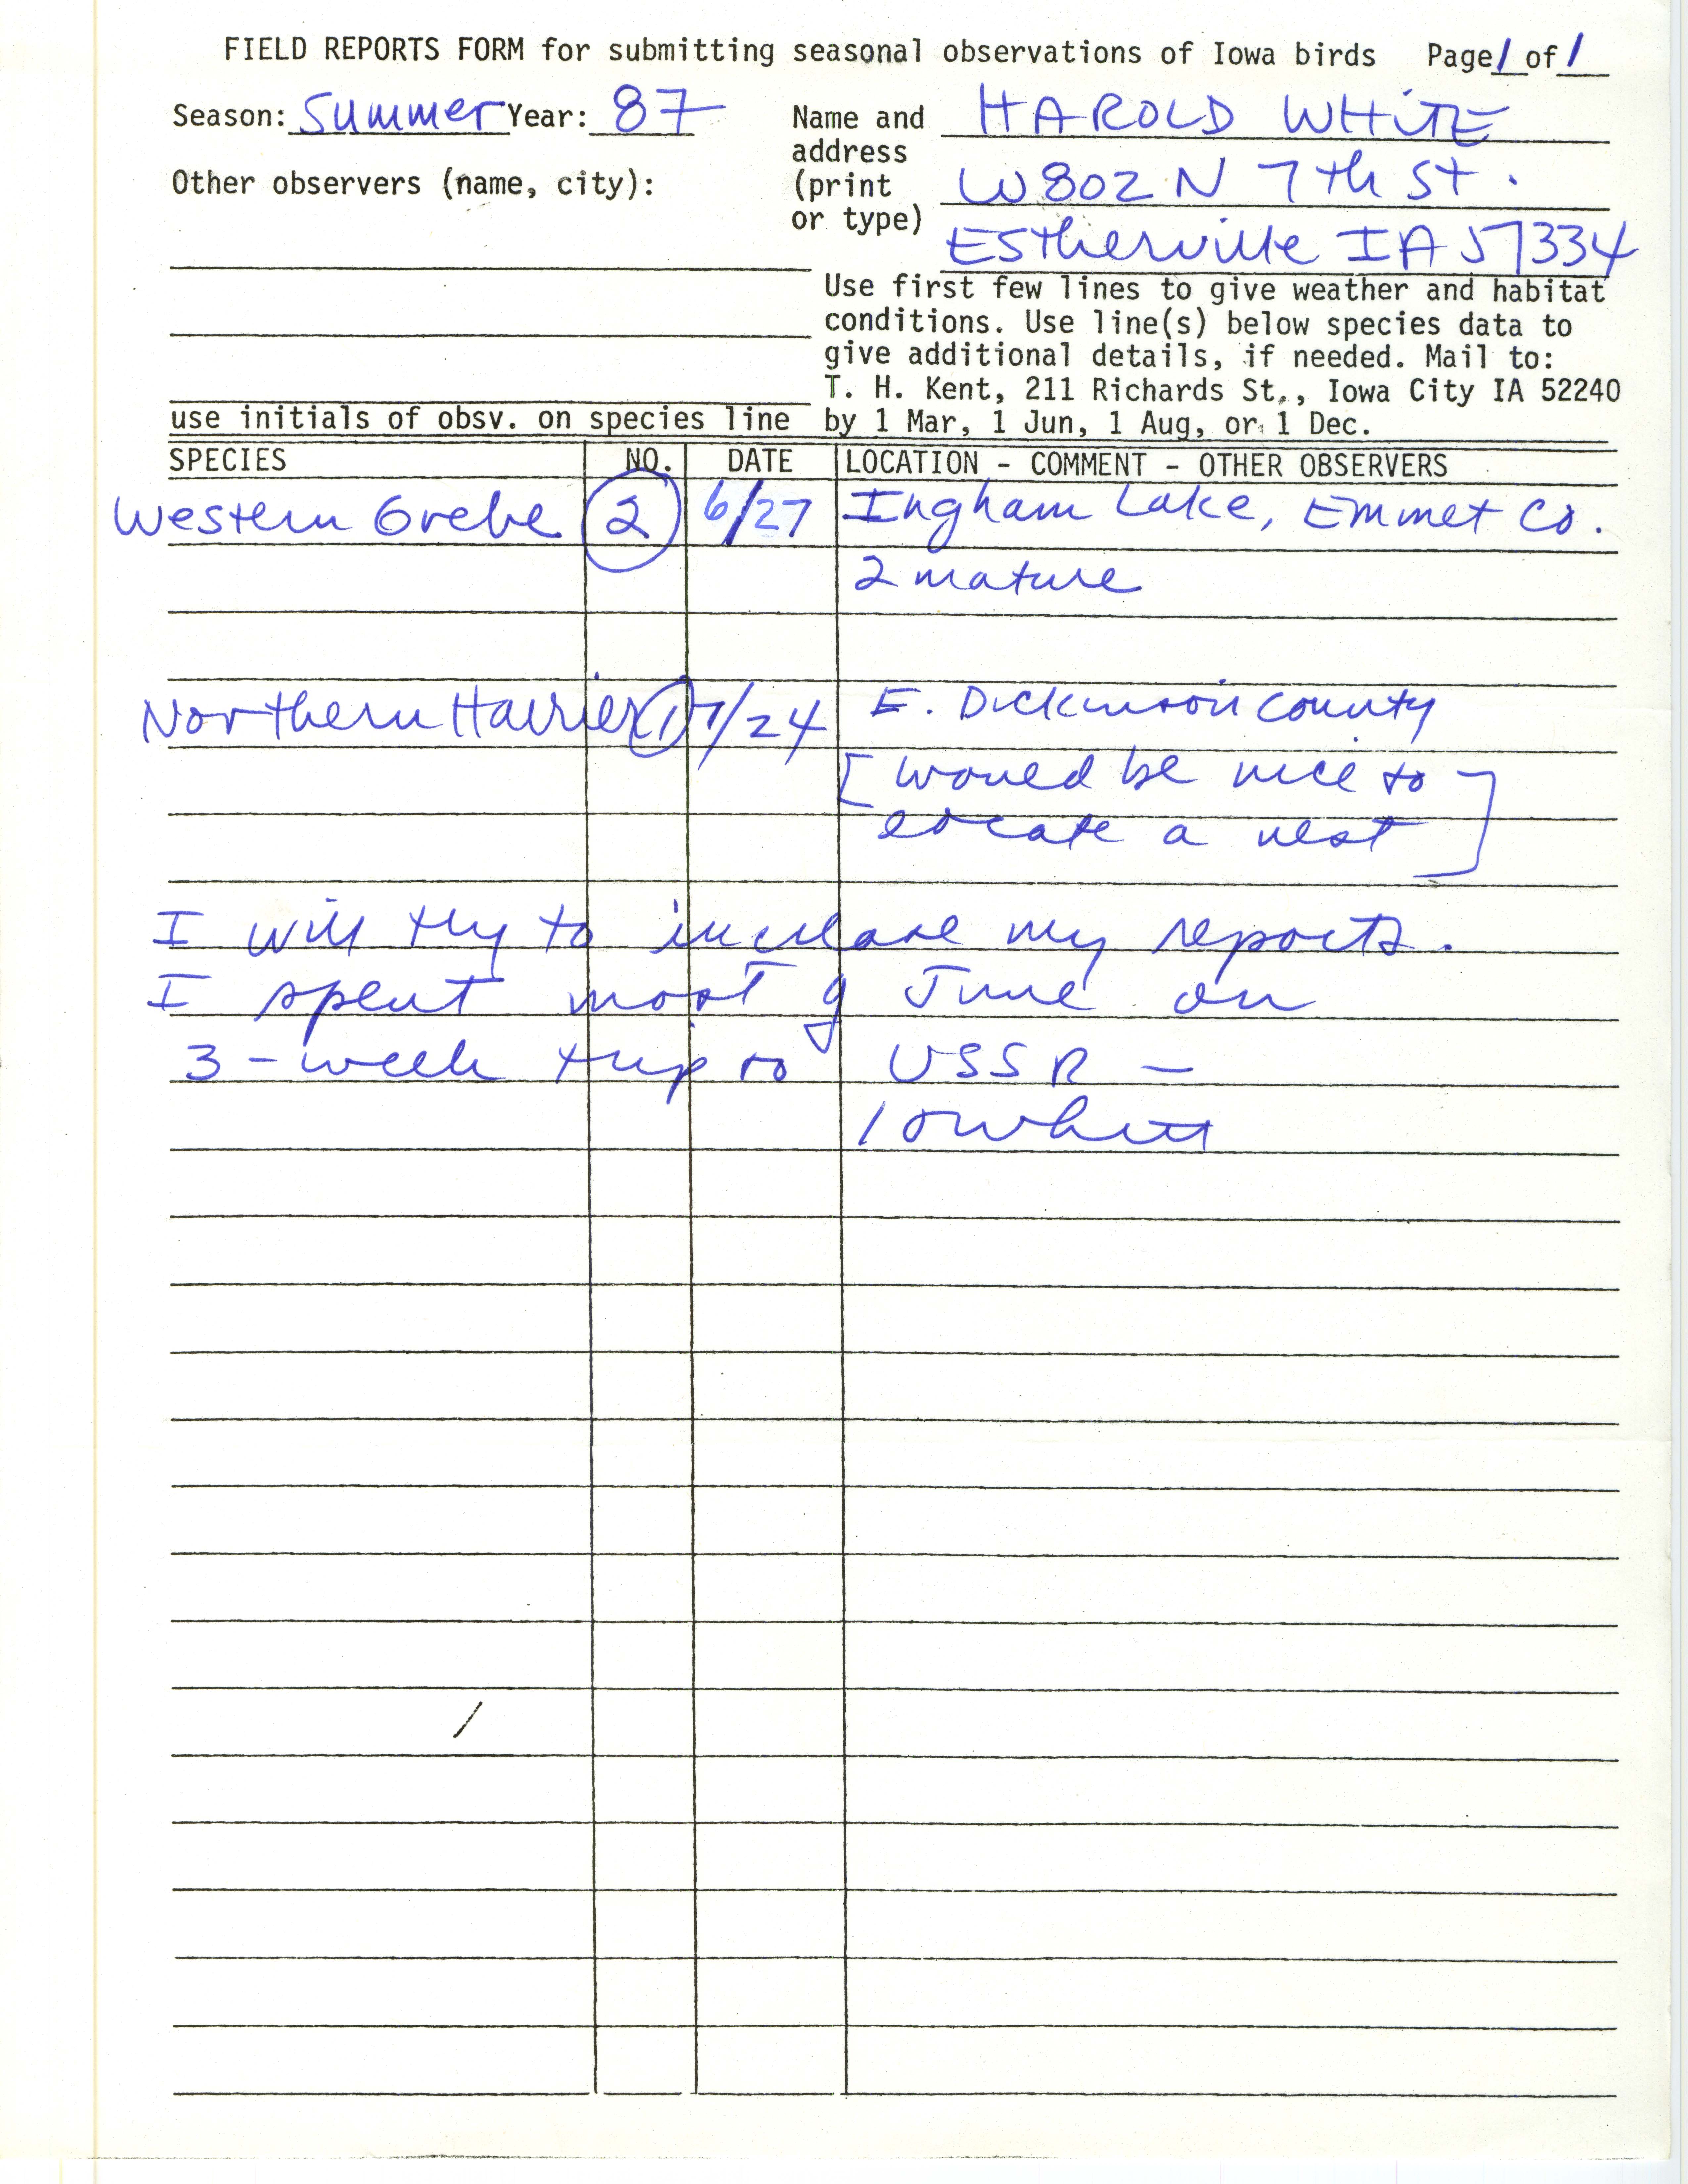 Field reports form for submitting seasonal observations of Iowa birds, Harold W. White, summer 1987